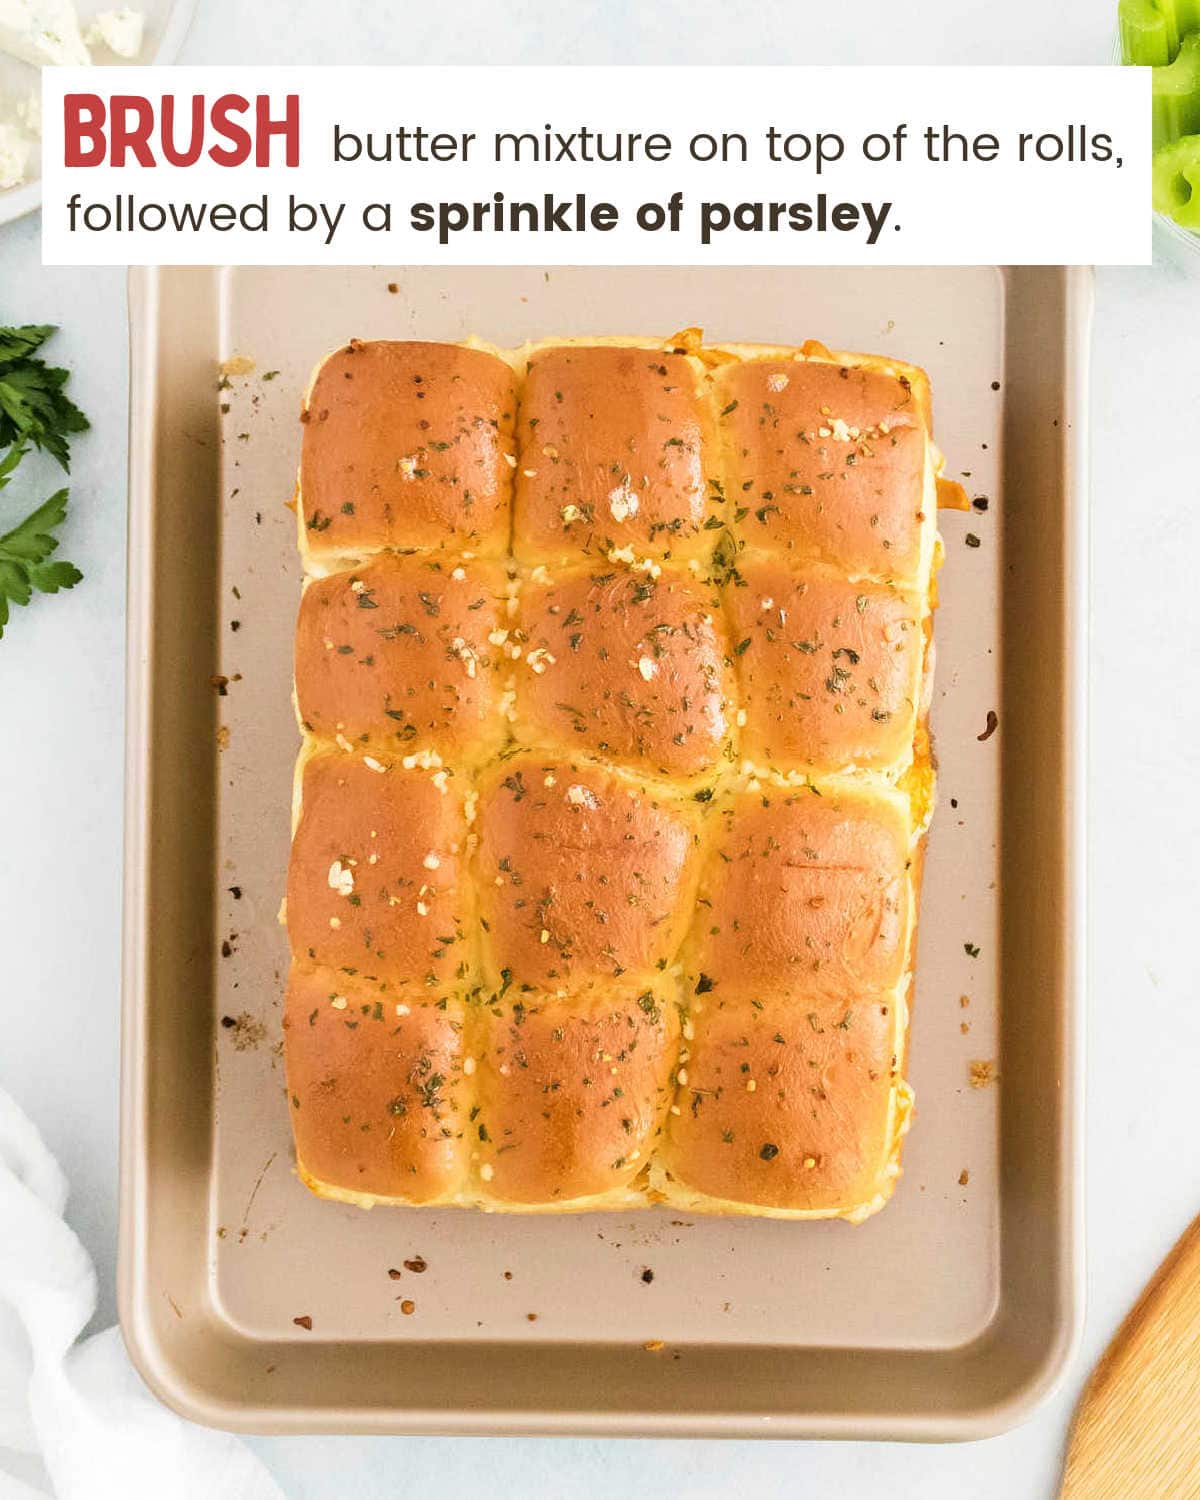 A tray of bread rolls with butter and parsley on top.